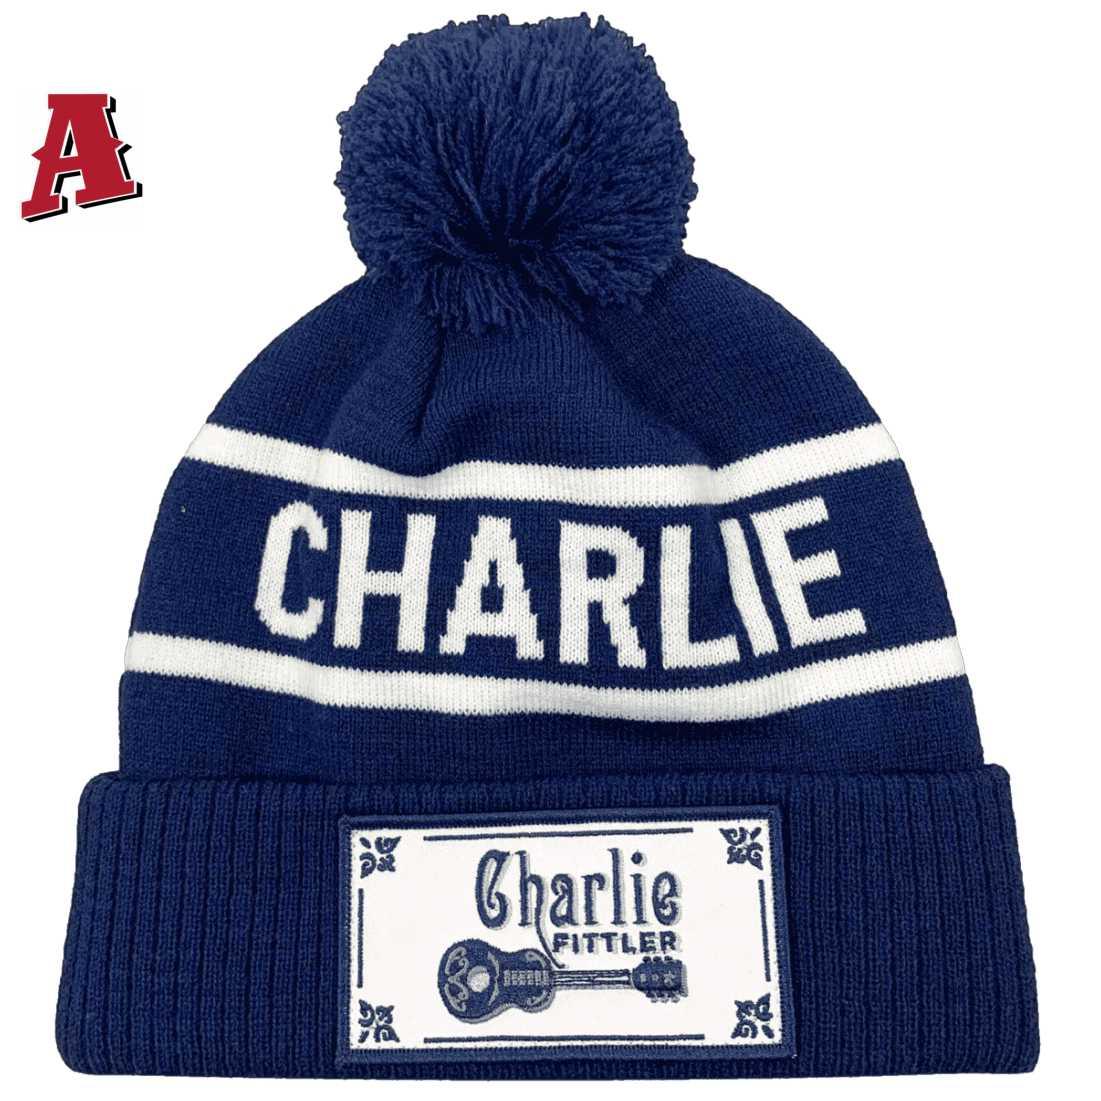 Charlie Fittler Country Music Artist Armidale NSW Aussie Acrylic Beanie with Roll-up Ribbed Cuff and Pom Pom Navy White